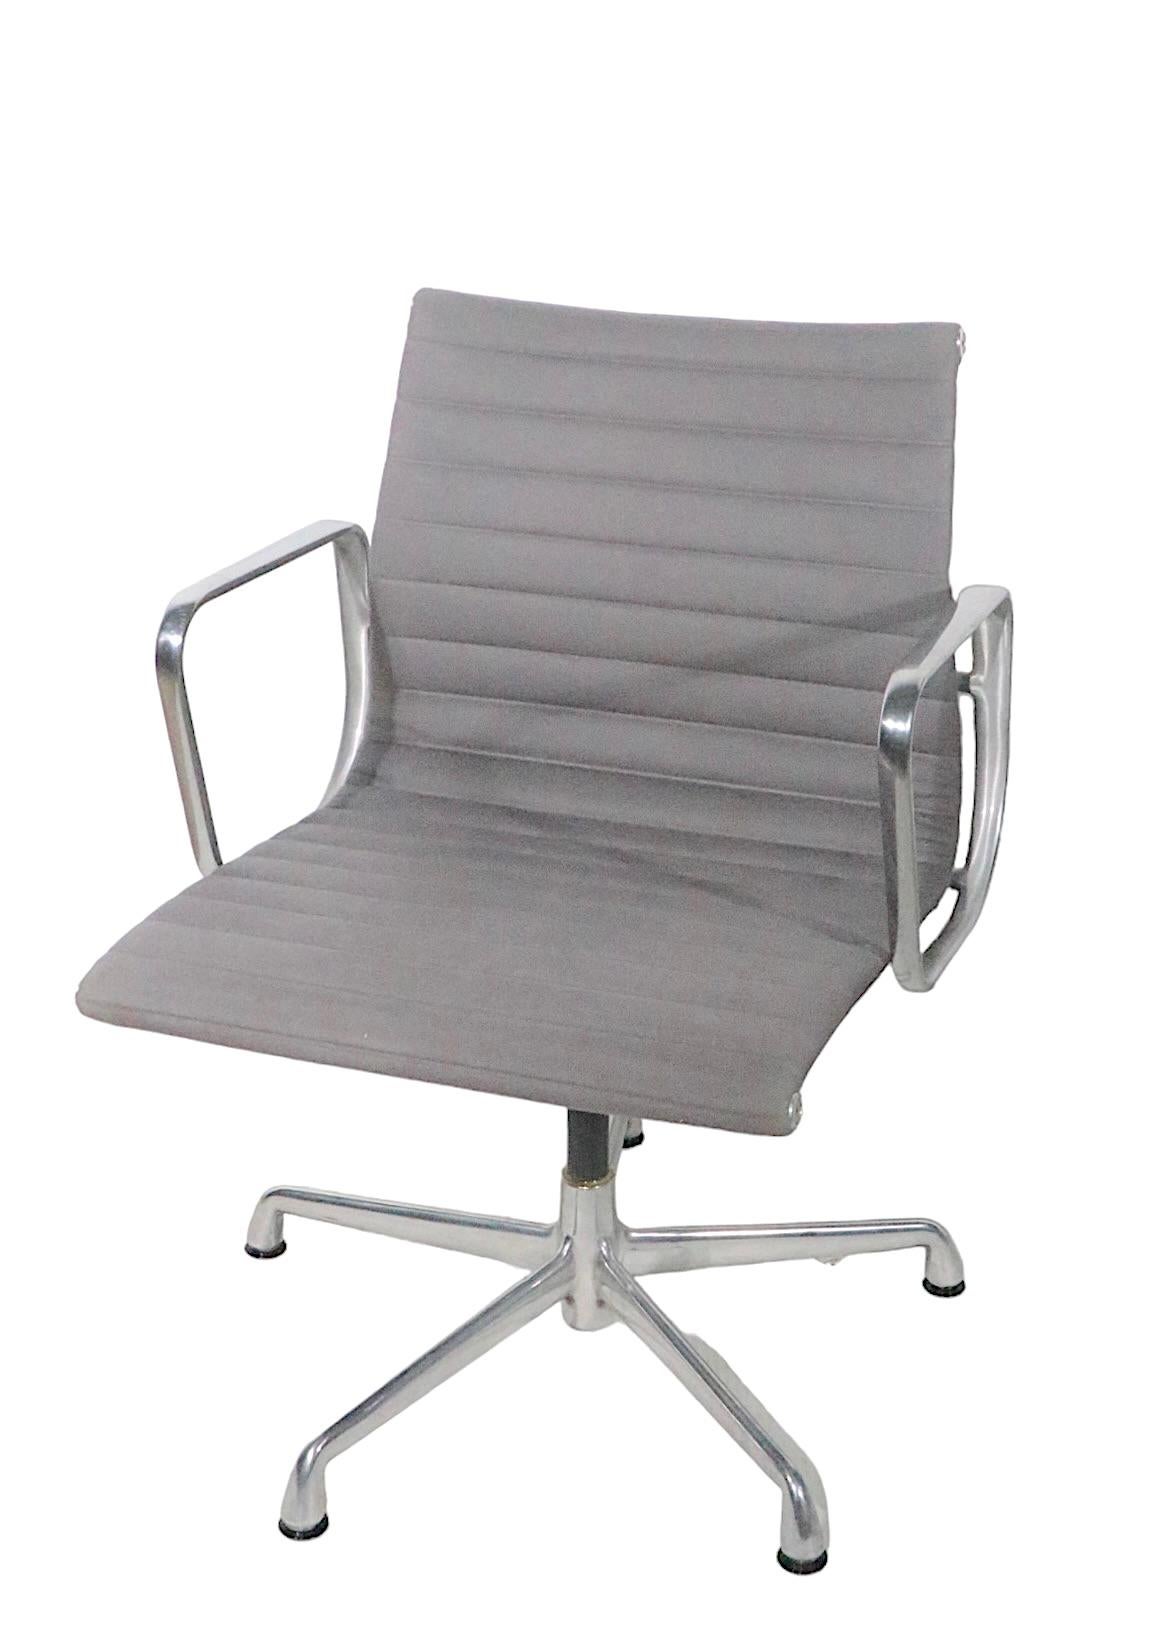 Eames Management Chairs in Grey Fabric Upholstery c. 1980 - 1990s 4 Available  For Sale 3